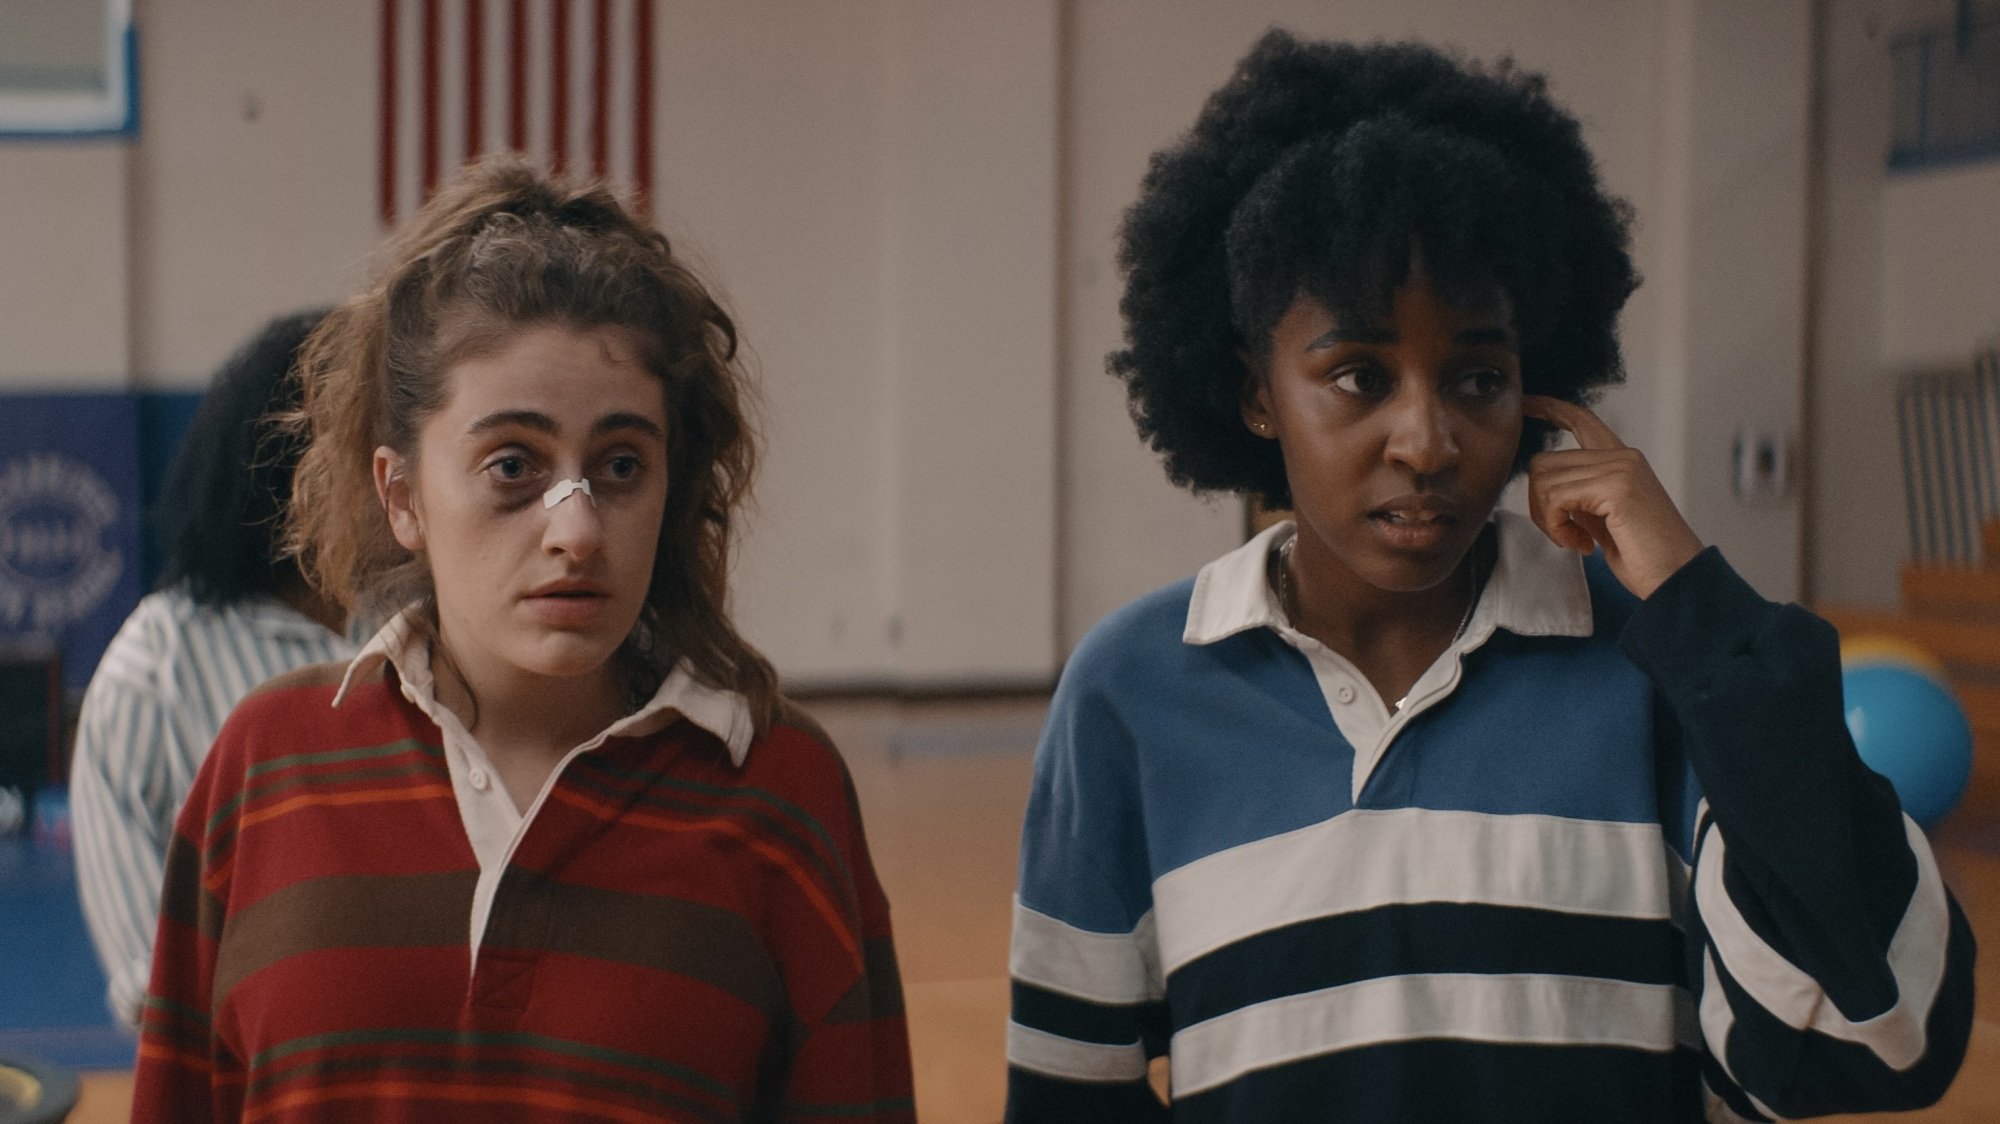 Two young woman with bruised faces standing in a high school gym.